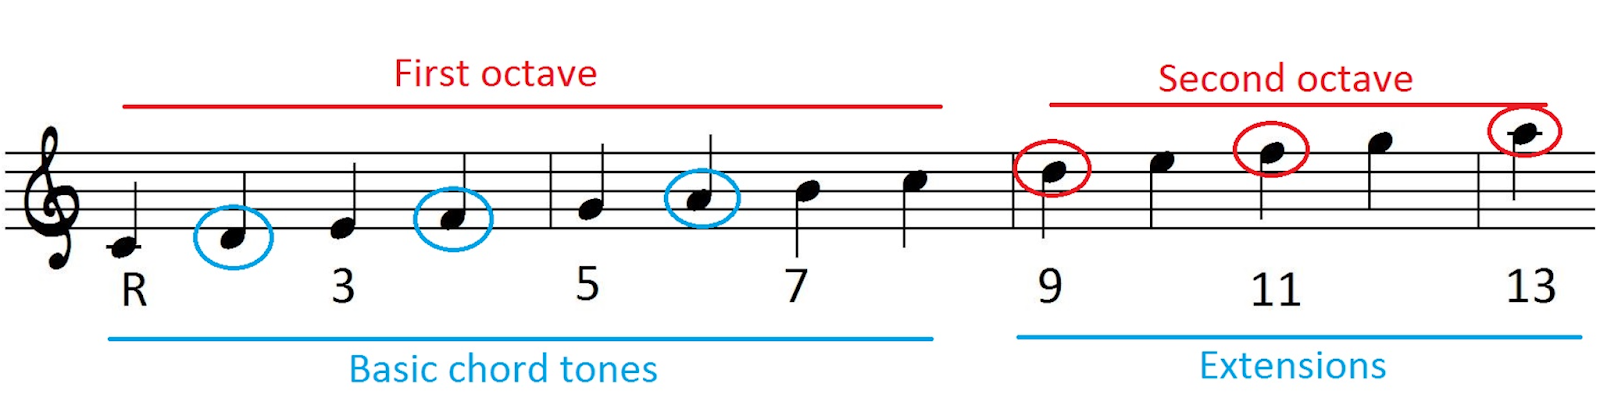 C major scale in two octaves outlining chord tones: Root, 3rd, 5th, 7th, 9th, 11th, and 13th.